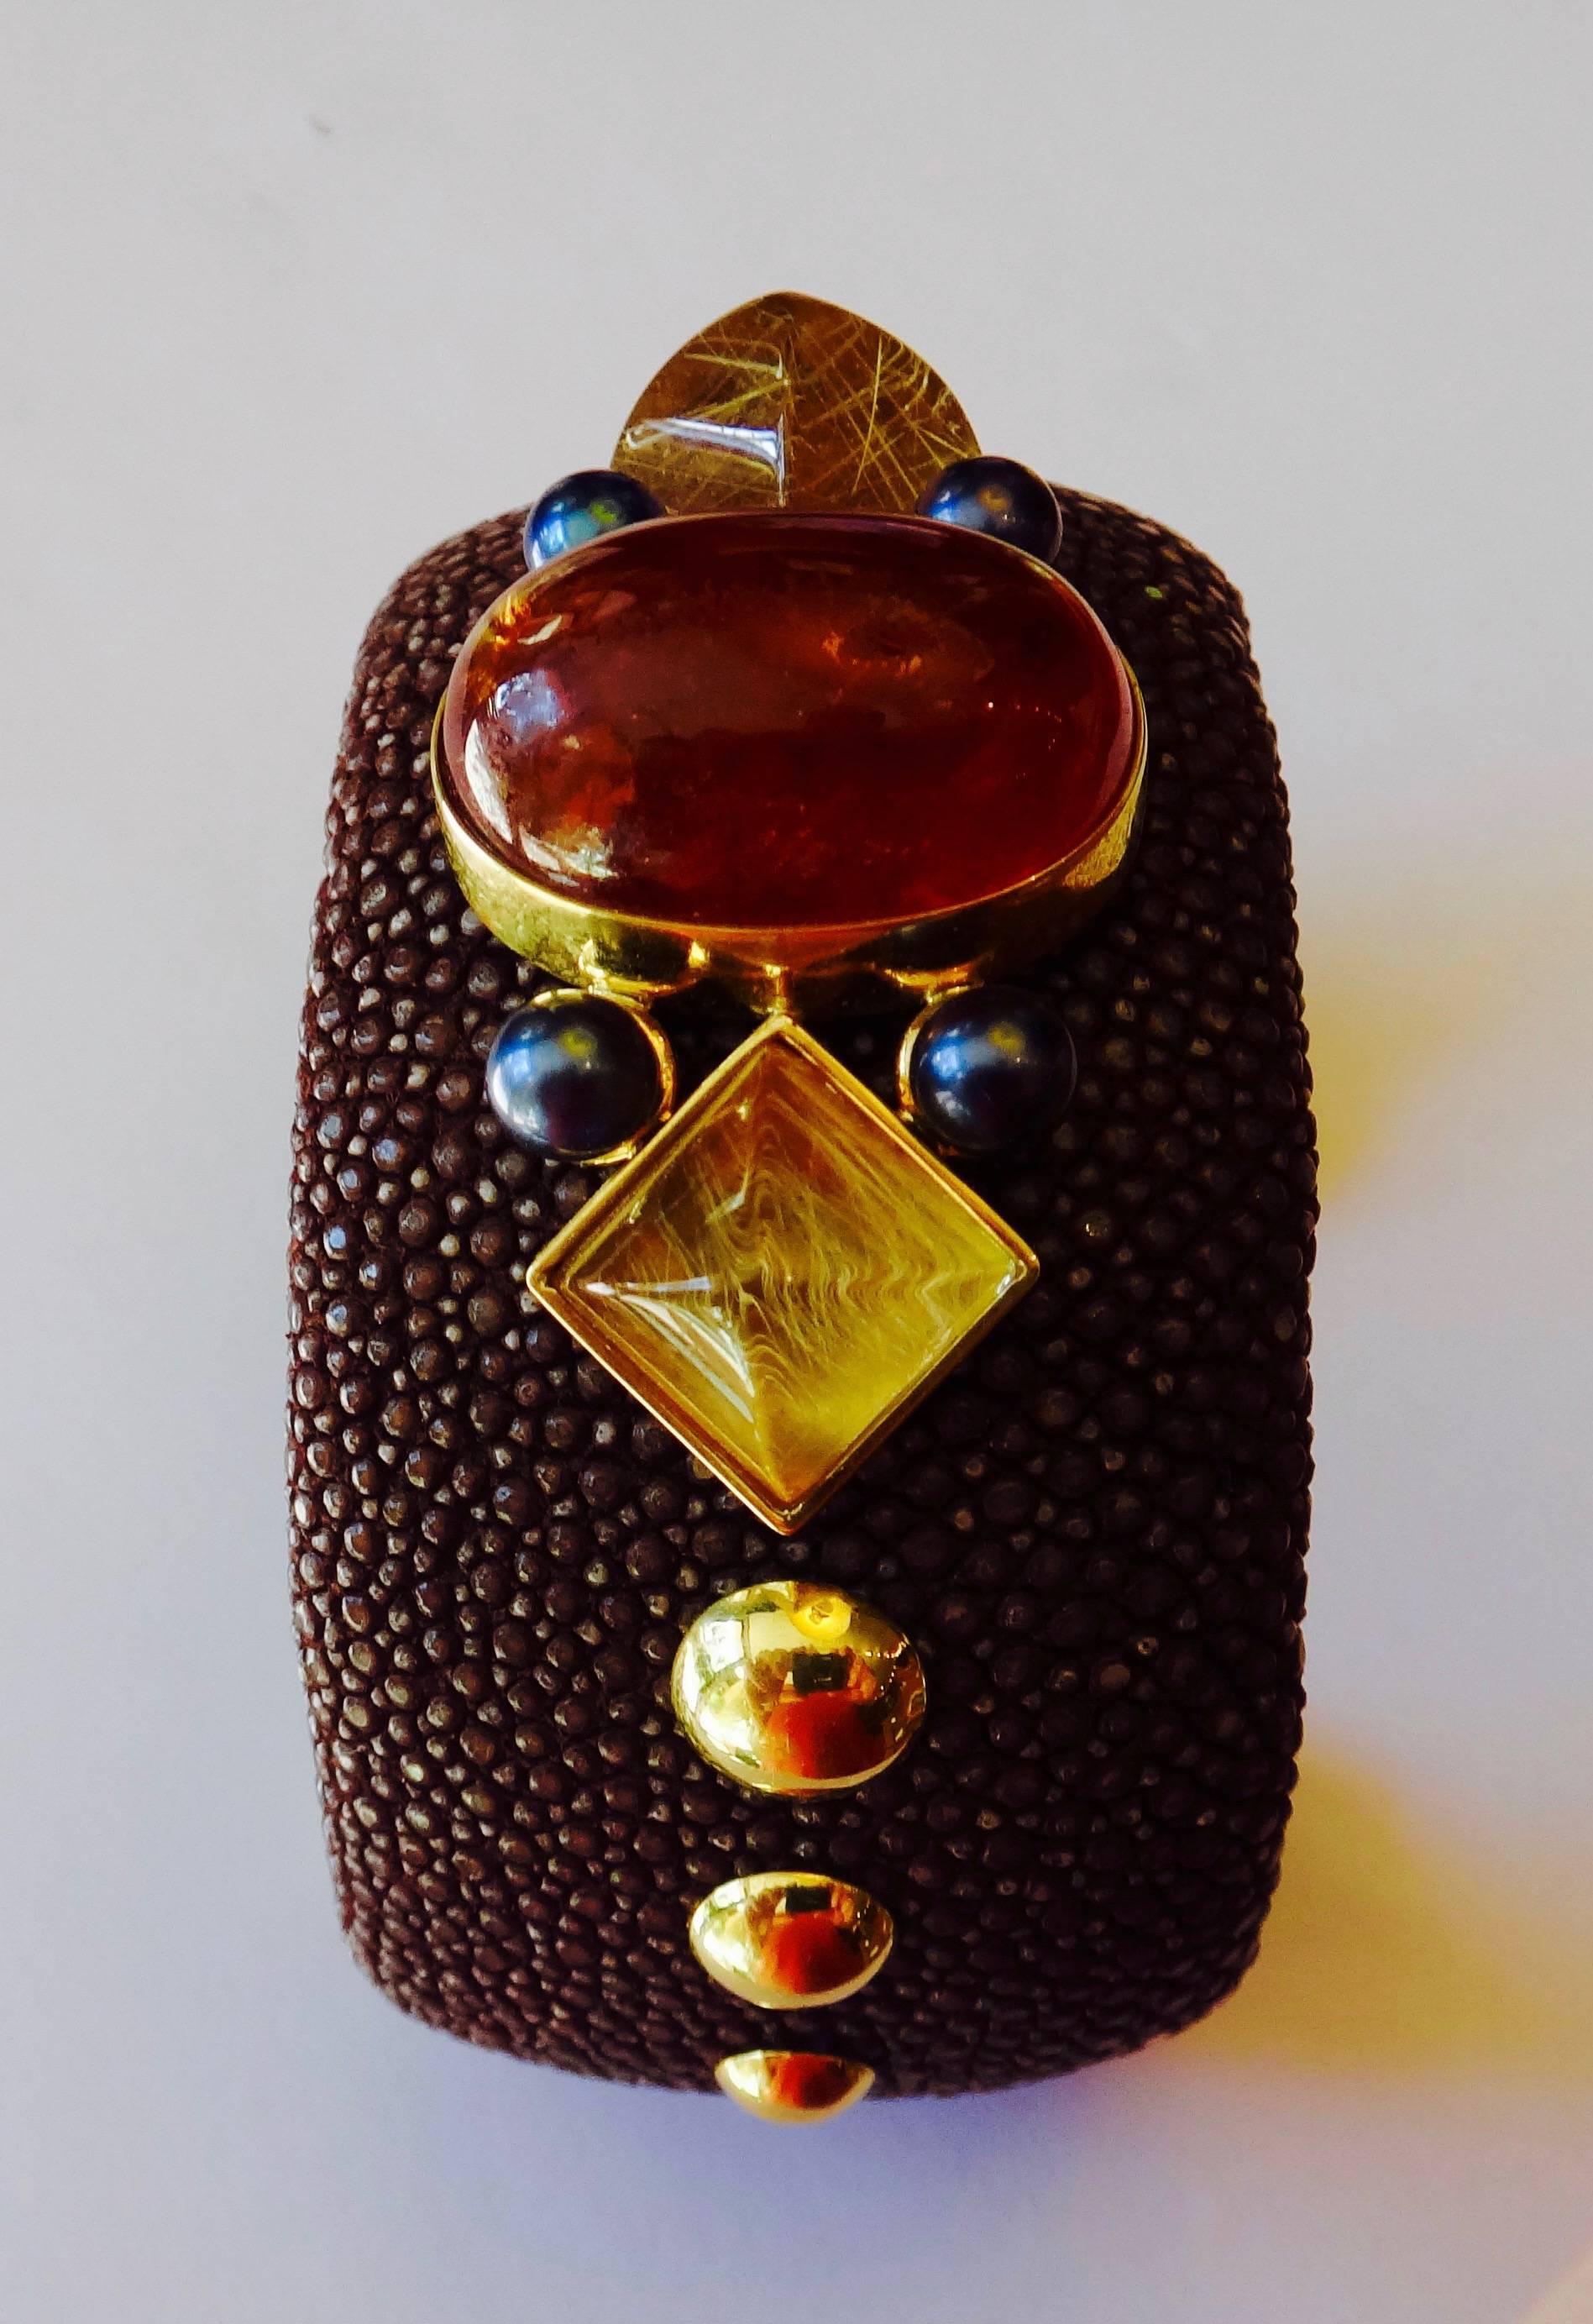 A dramatic mocha colored stingray cuff is decorated with a bold cabochon of hessenite garnet, matching sugarloaf cabochons of rutilated quartz, four black pearls and 18k yellow gold details.  The inside diameter is 6.75 inches though the cuff is